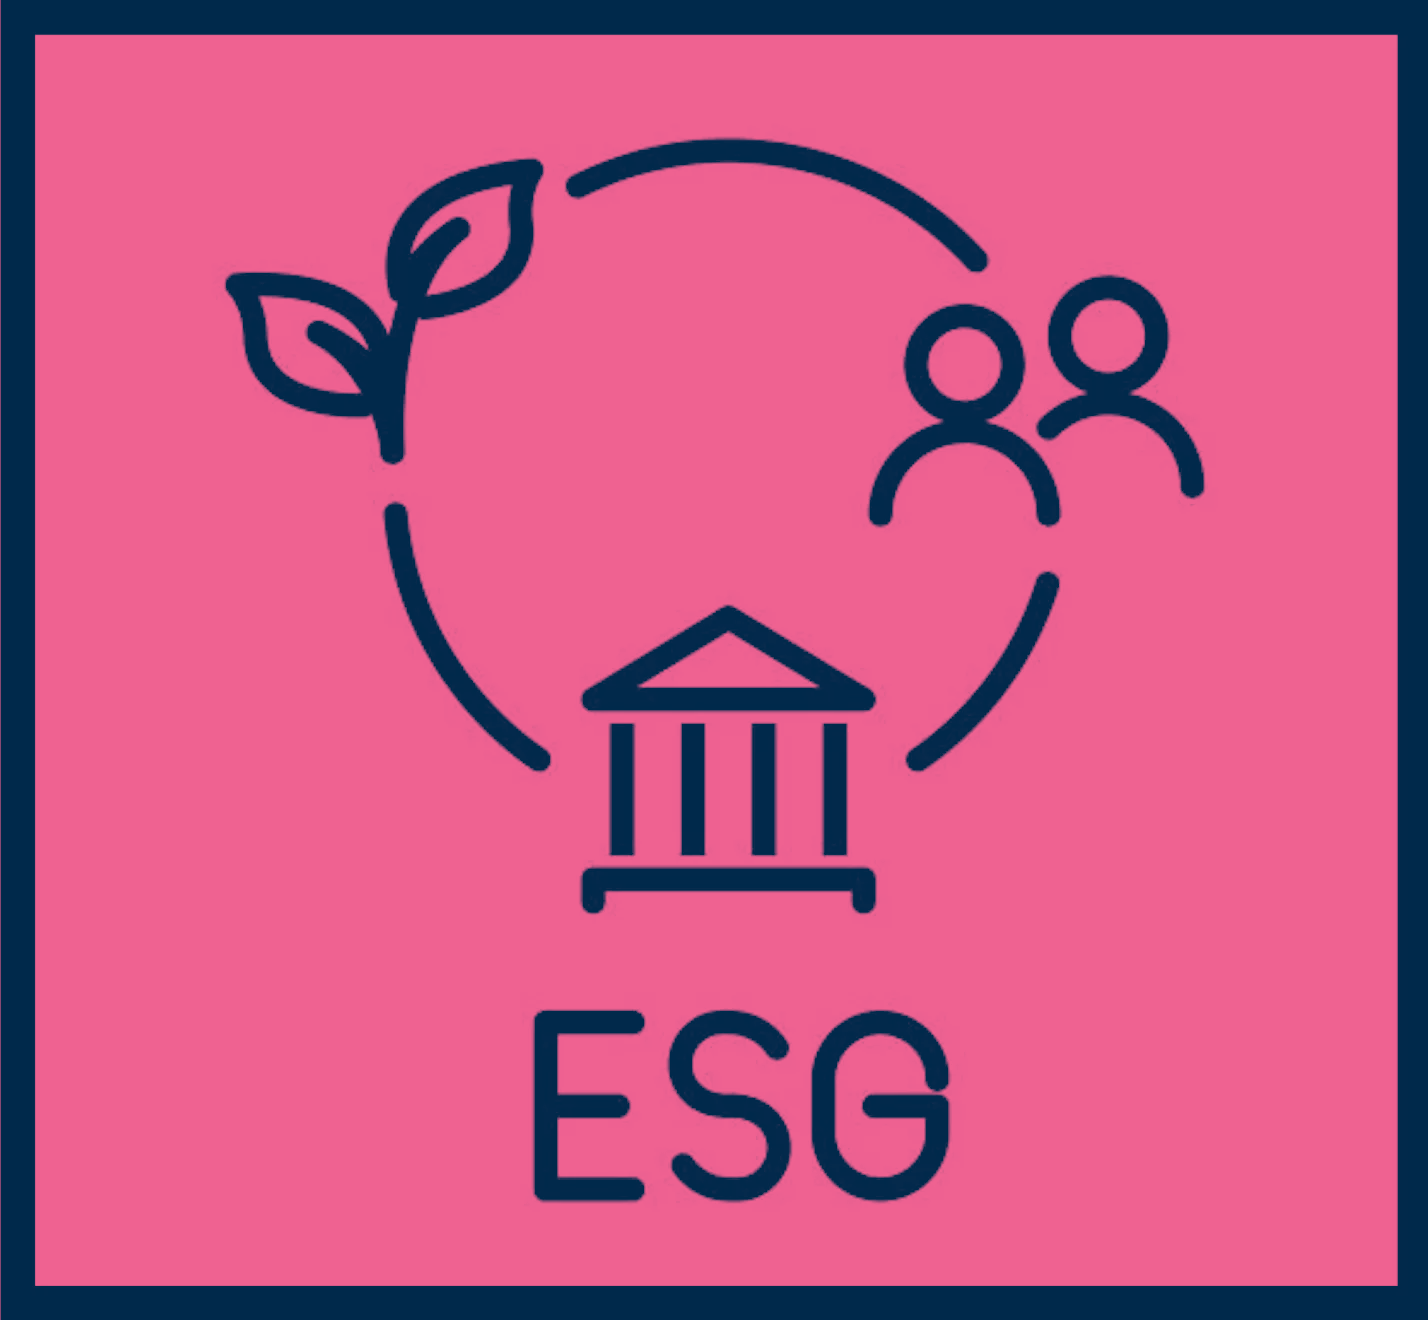 A Users Guide to ESG at EthicsGrade What is it? Why should you care? and How does AI fit in?